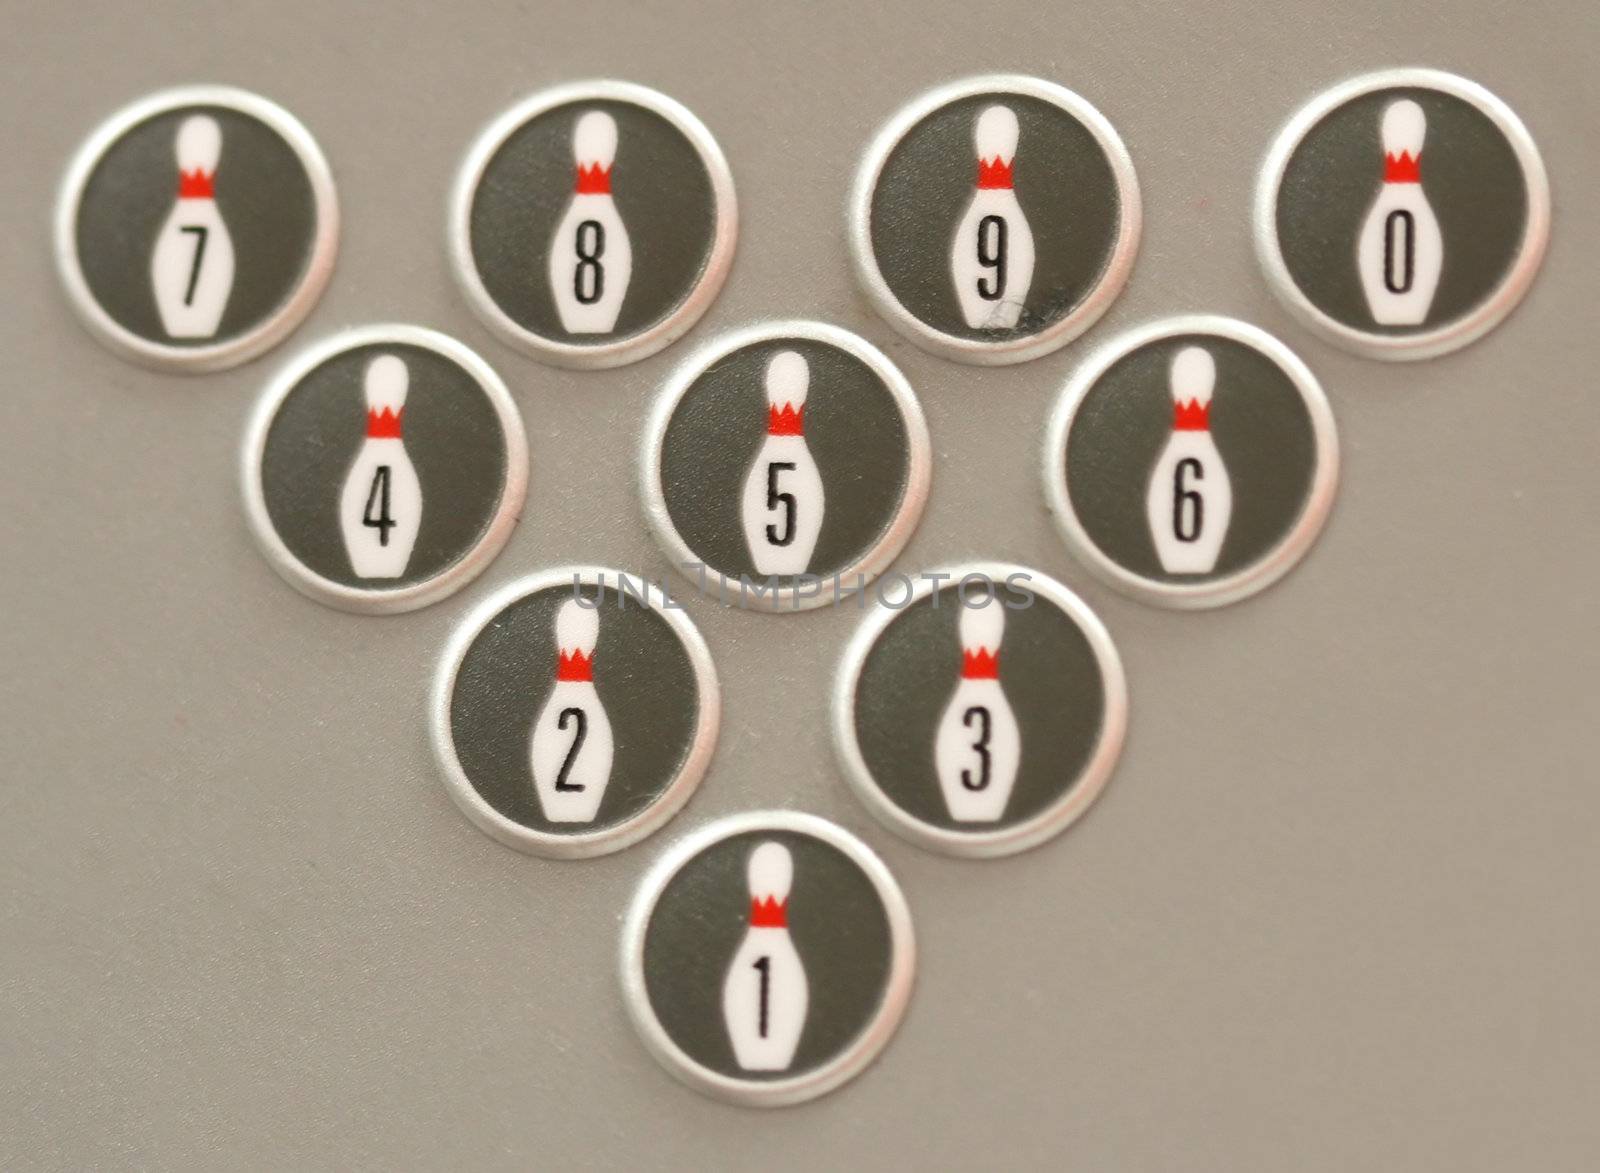 Bowling pin buttons. Adjust your pins